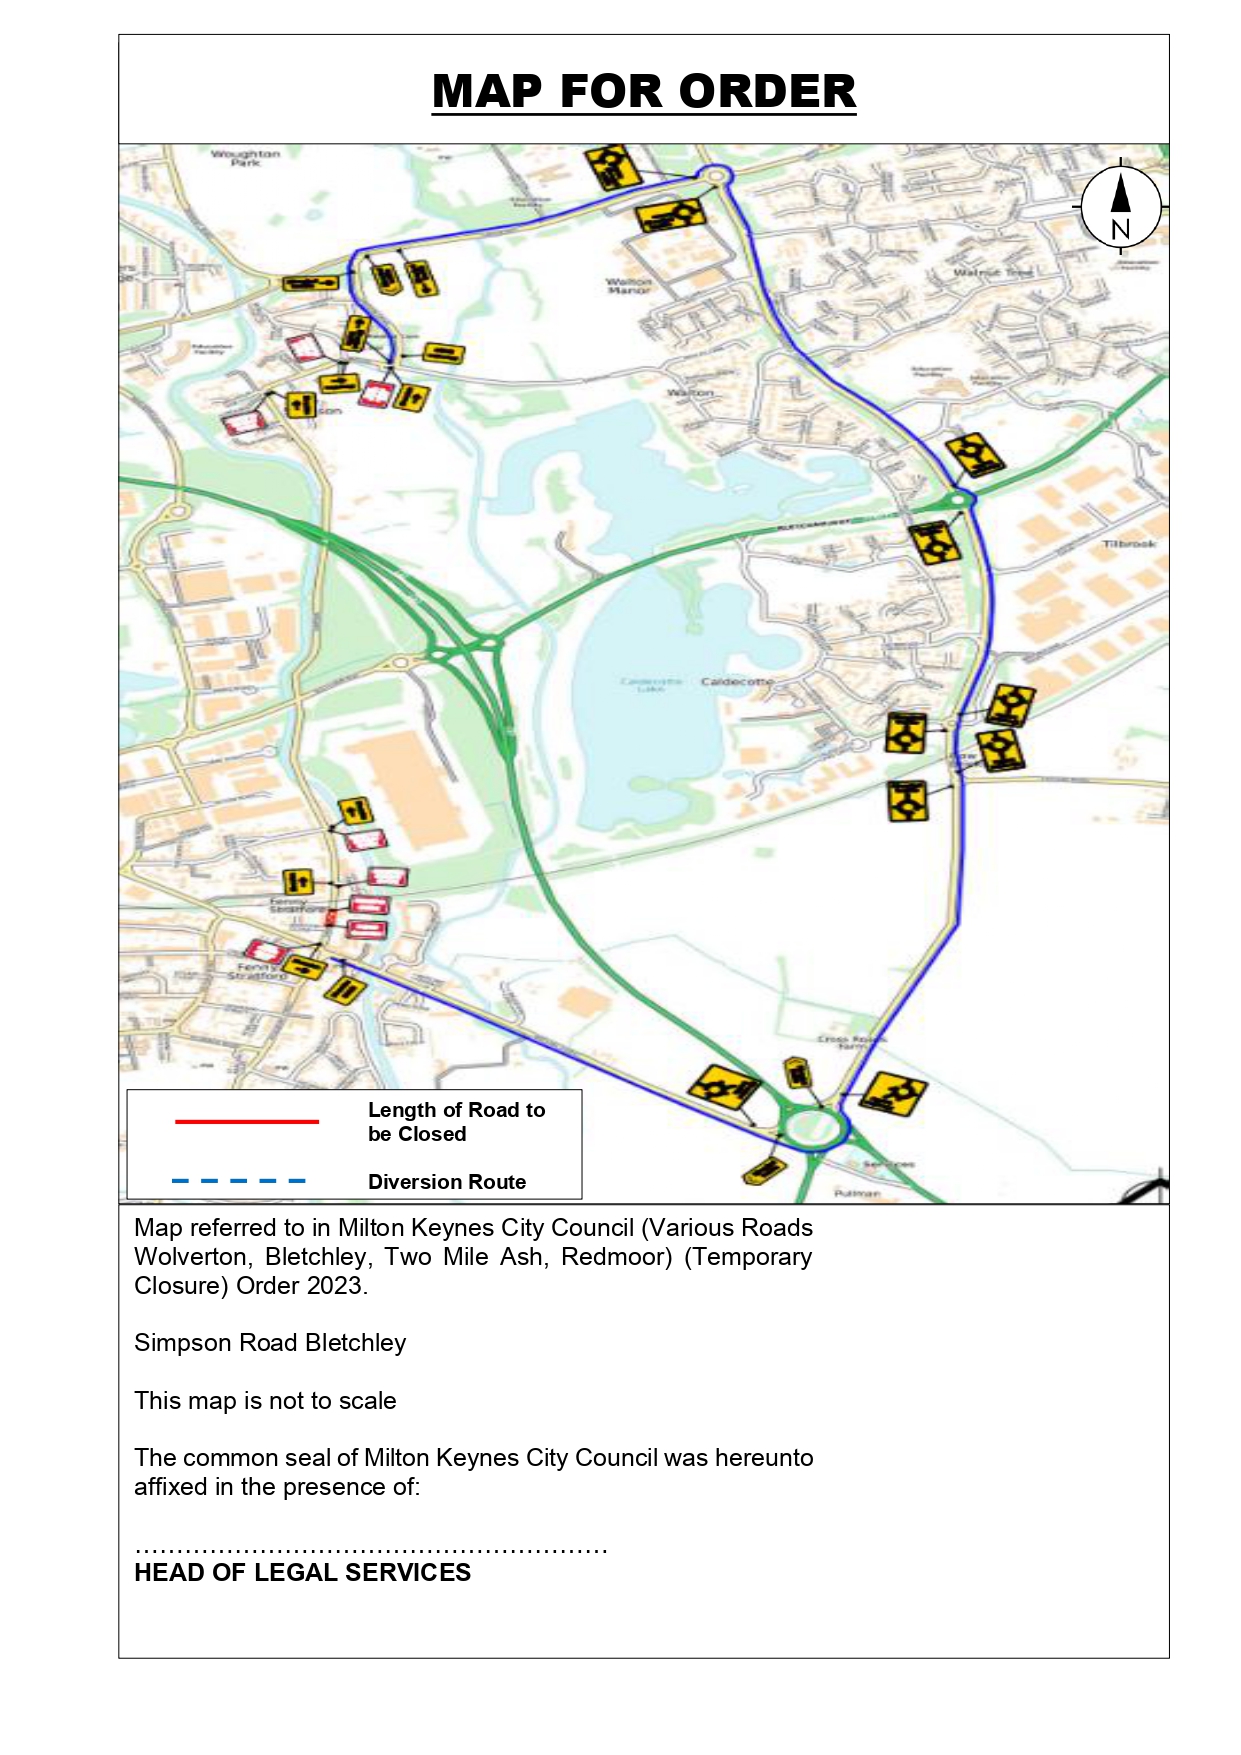 Image of Simpson Road closure route options